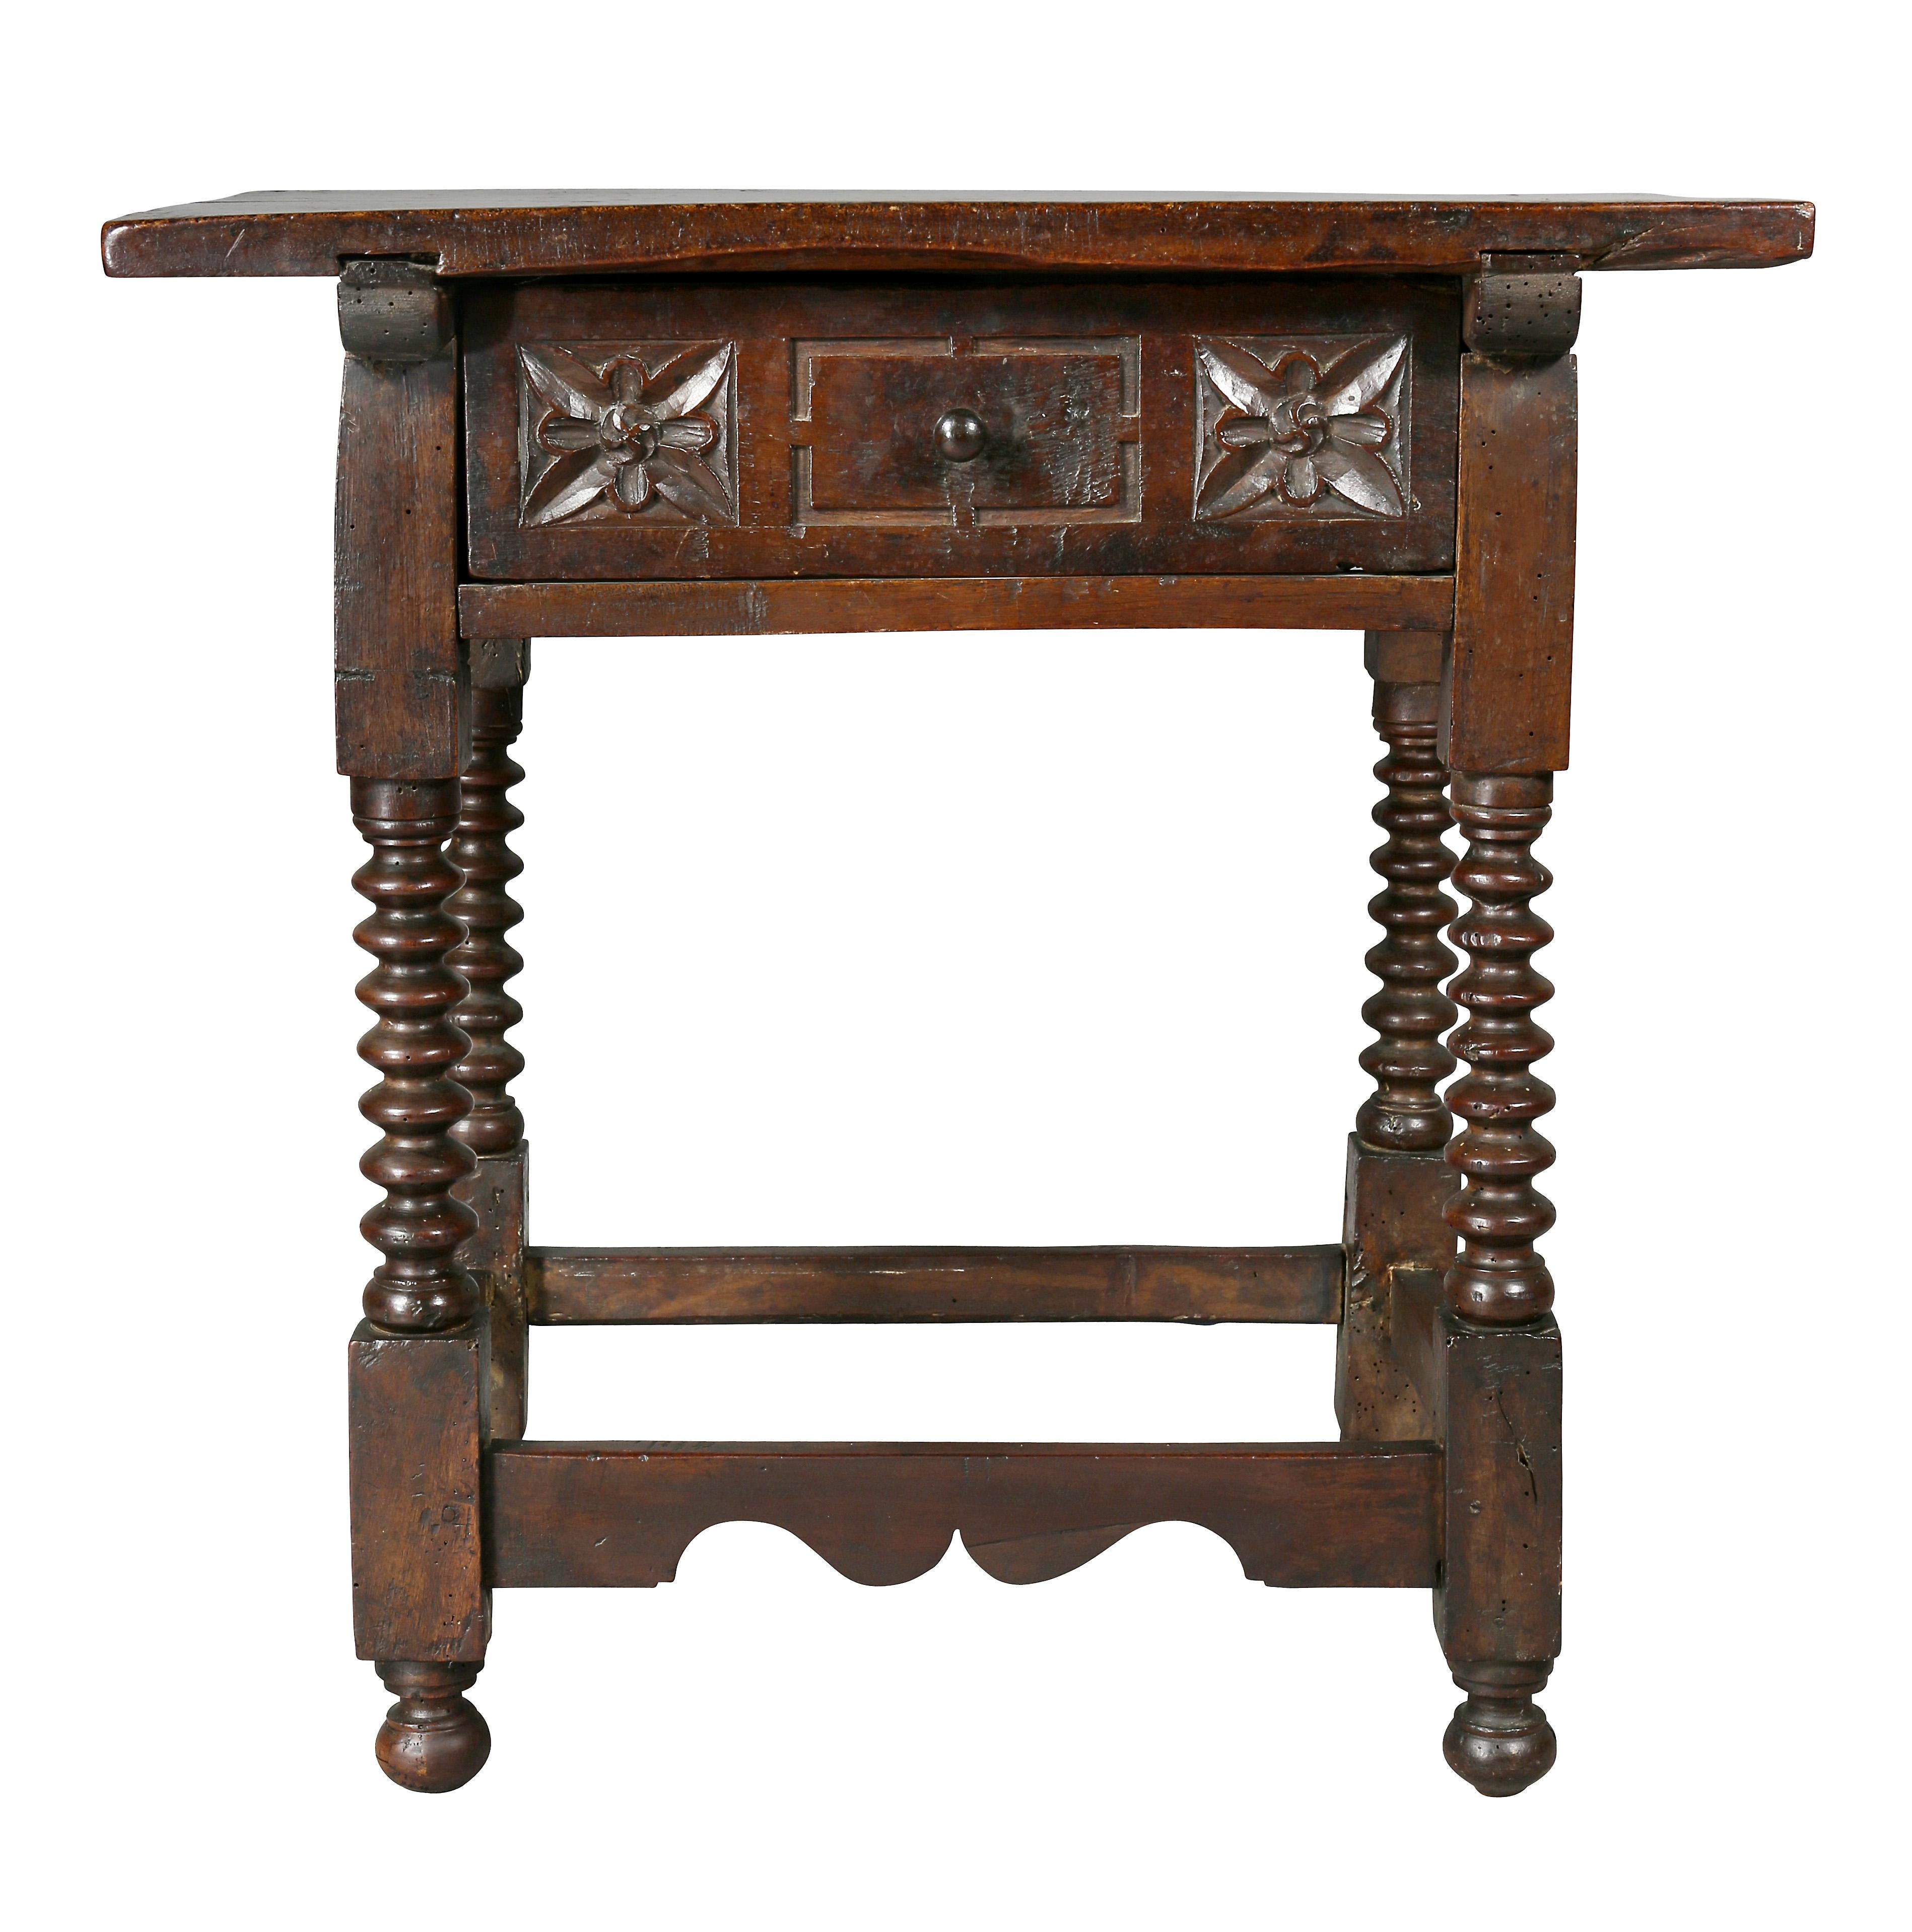 Rectangular top over a chip carved drawer raised on ring turned legs joined by a box stretcher.